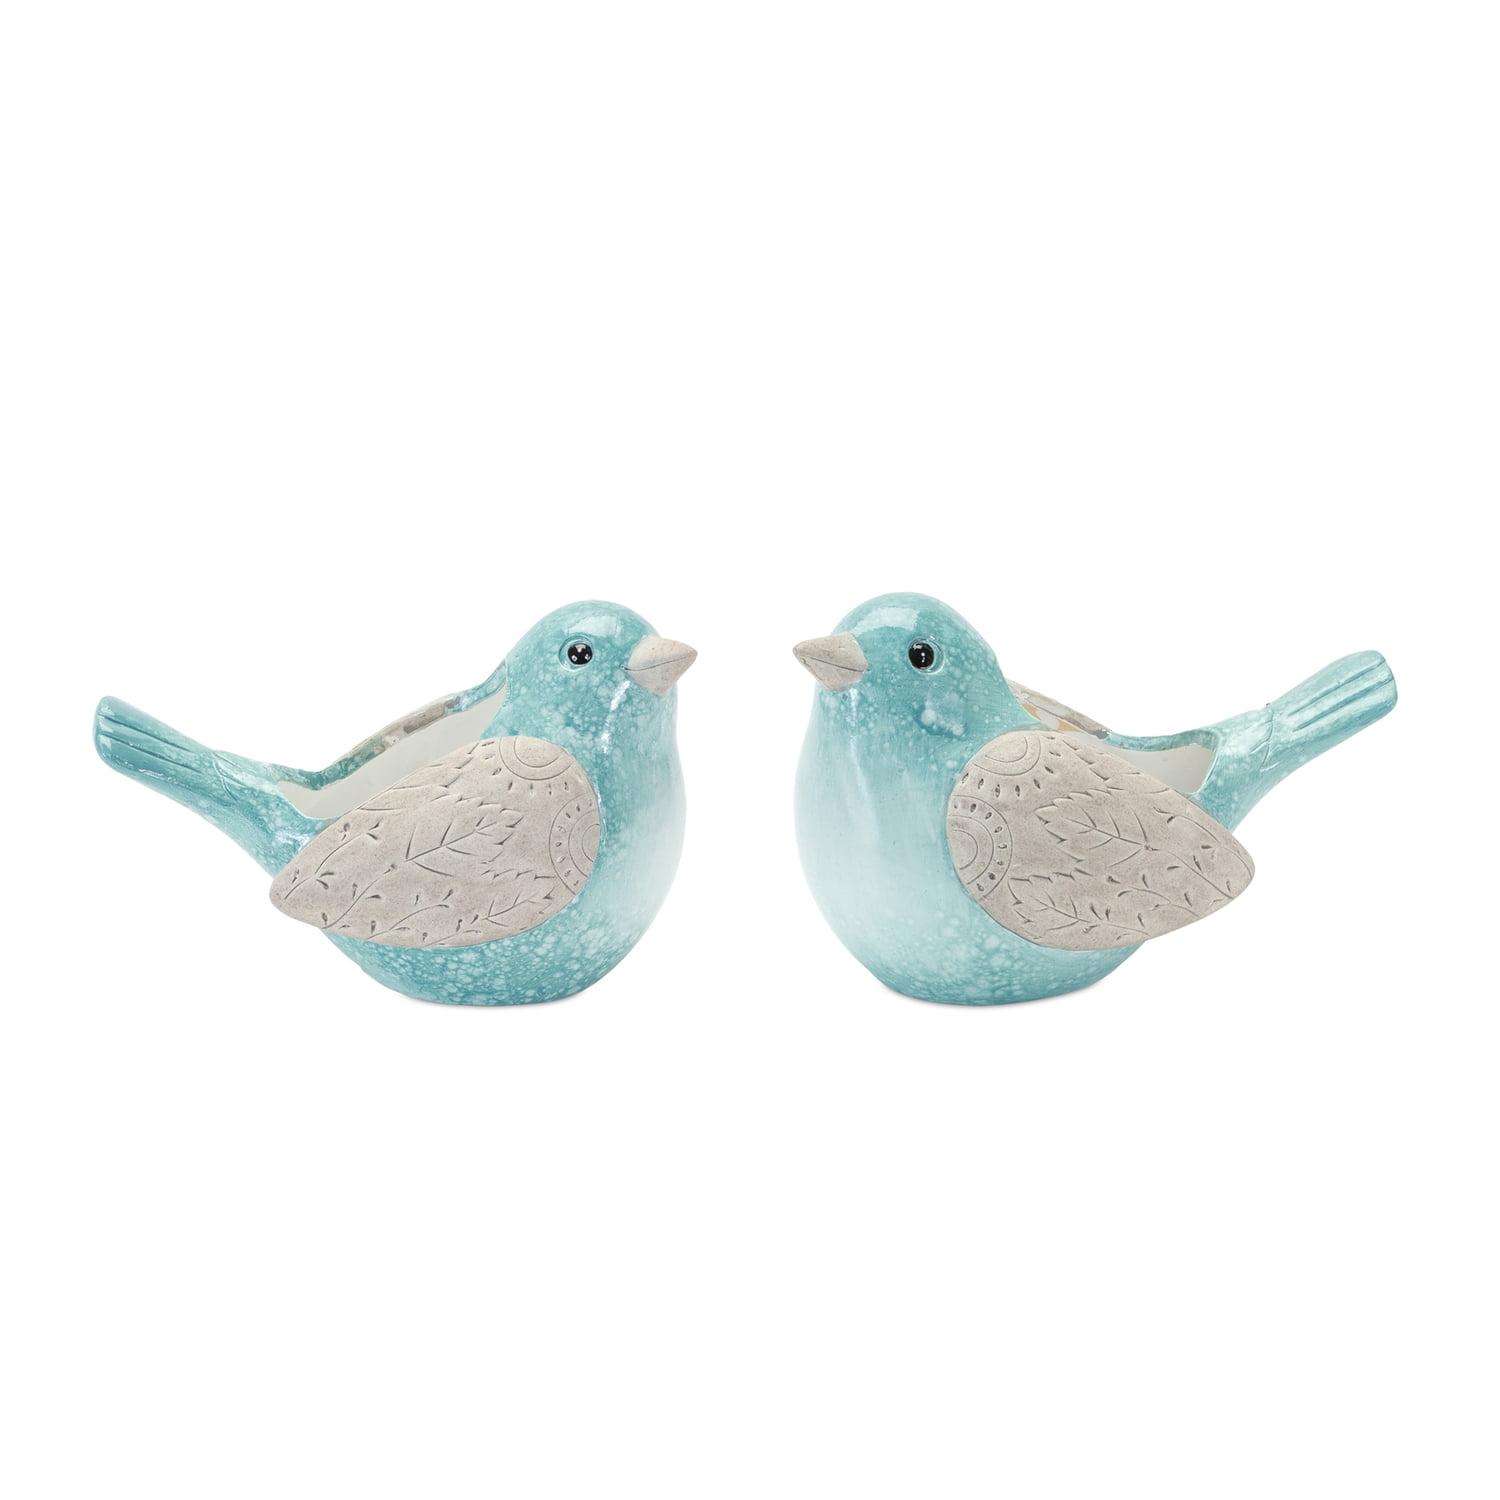 Whimsical Blue Terra Cotta Bird Planter Set with Butterfly Accents